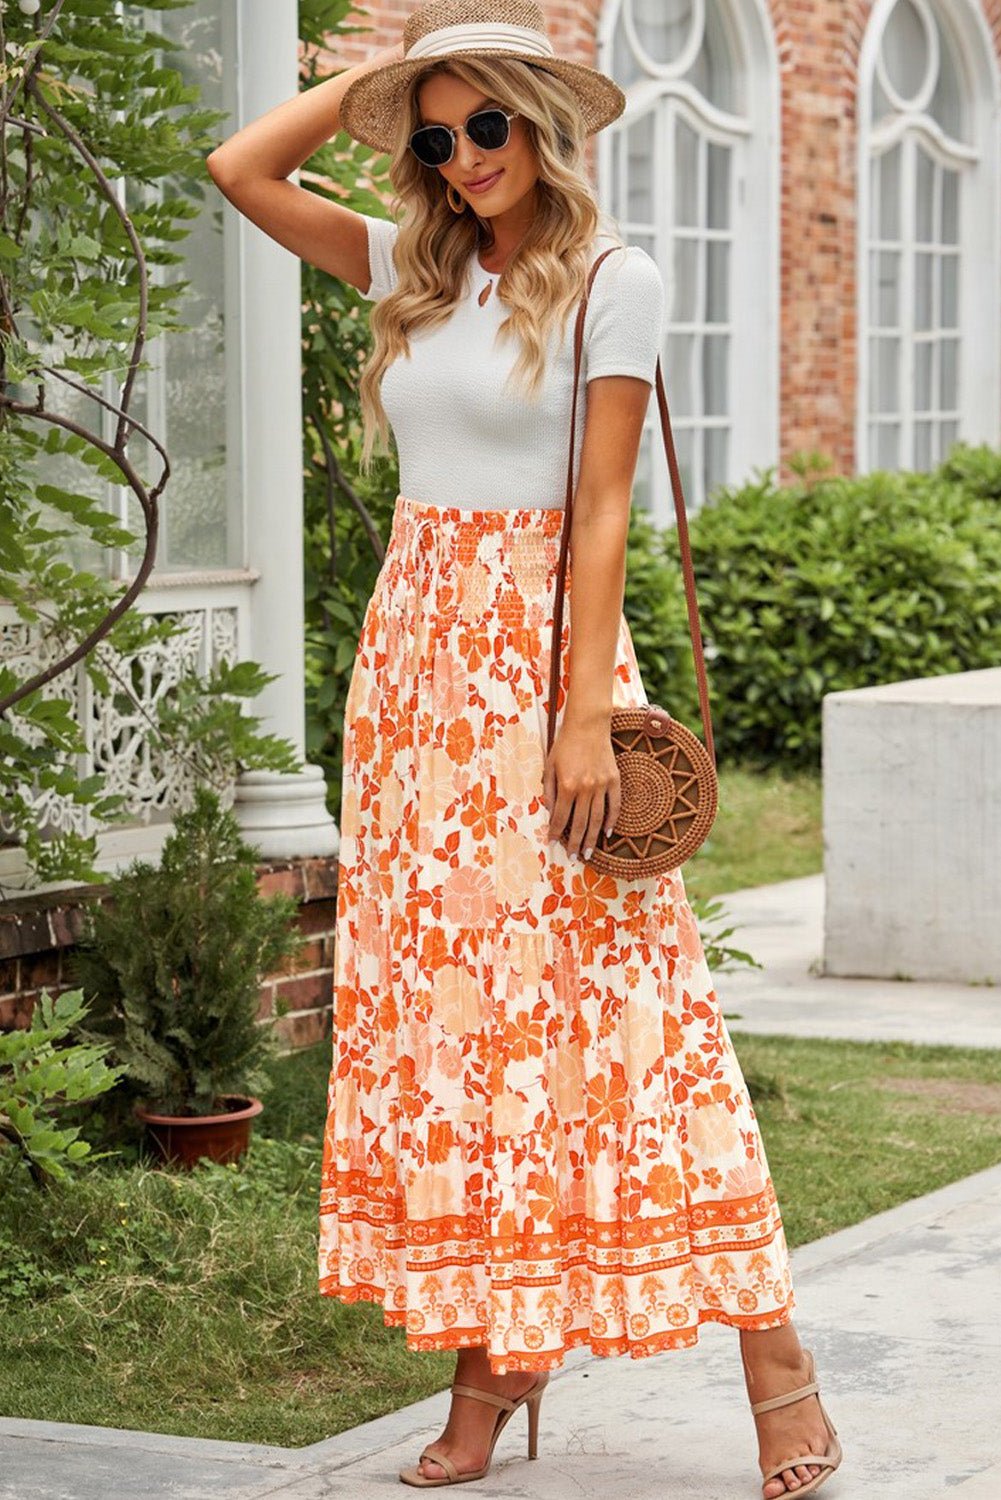 Such A Delight Tiered Floral Smocked Maxi Skirt orange floral maxi skirt at ankle length. #Firefly Lane Boutique1